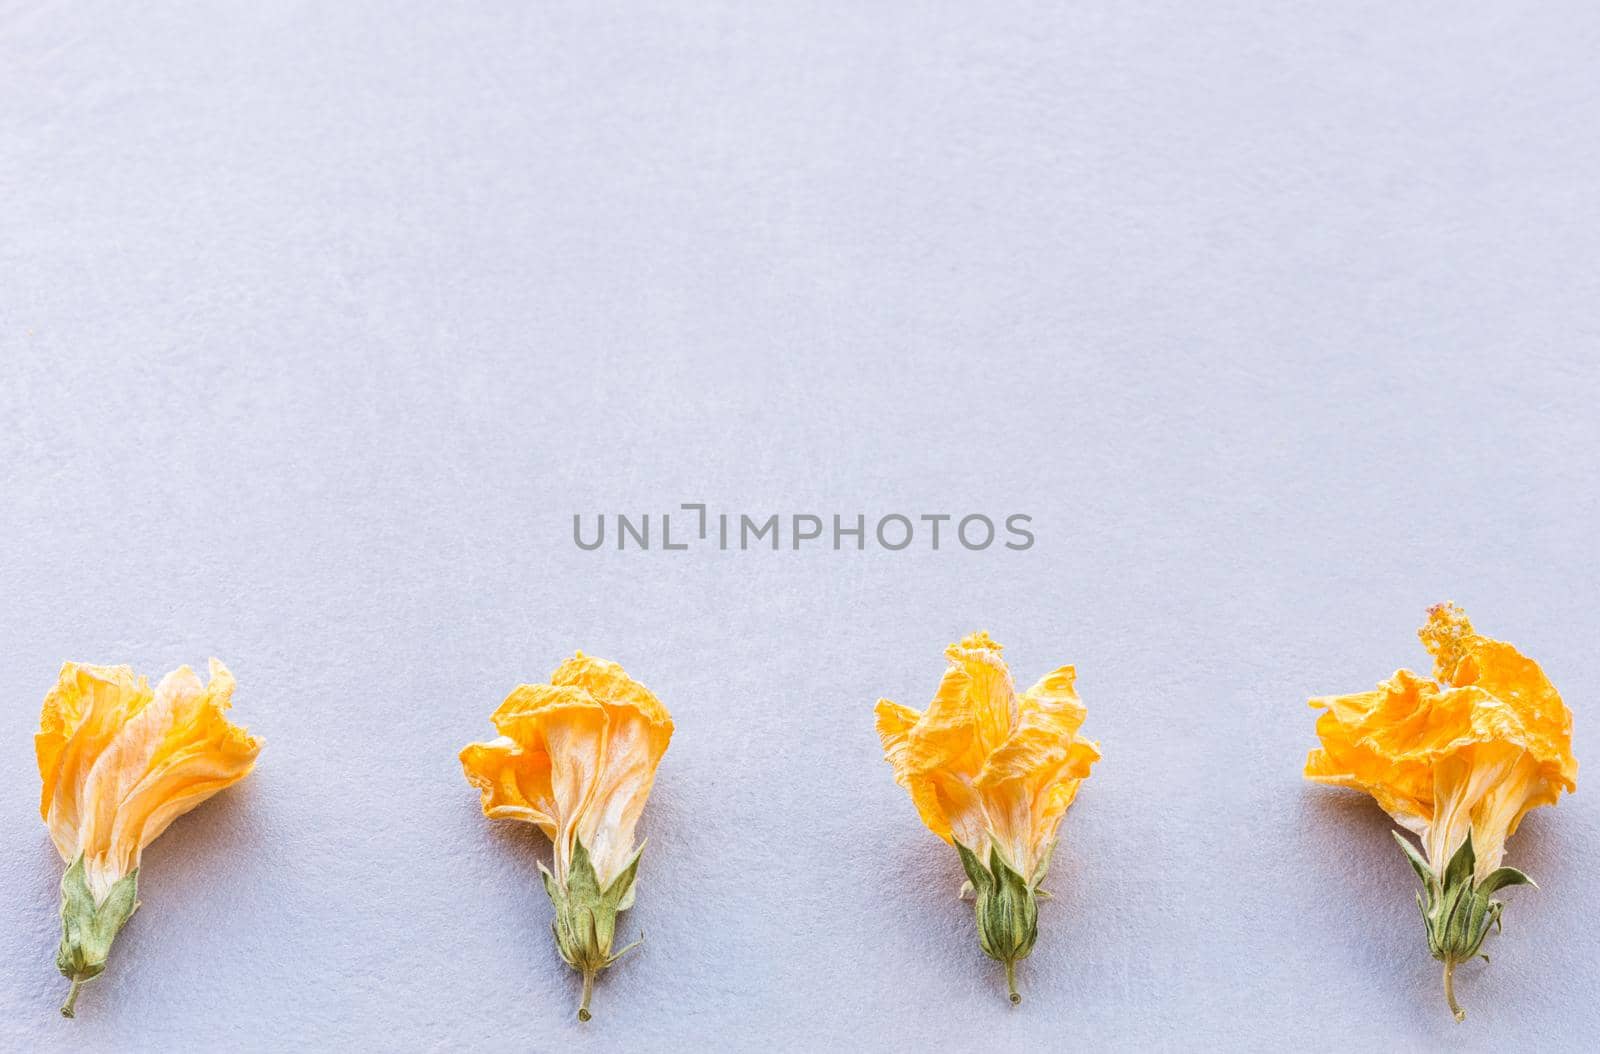 horizontal composition of four yellow dried flowers arranged in line at the bottom on a textured gray background with soft natural light